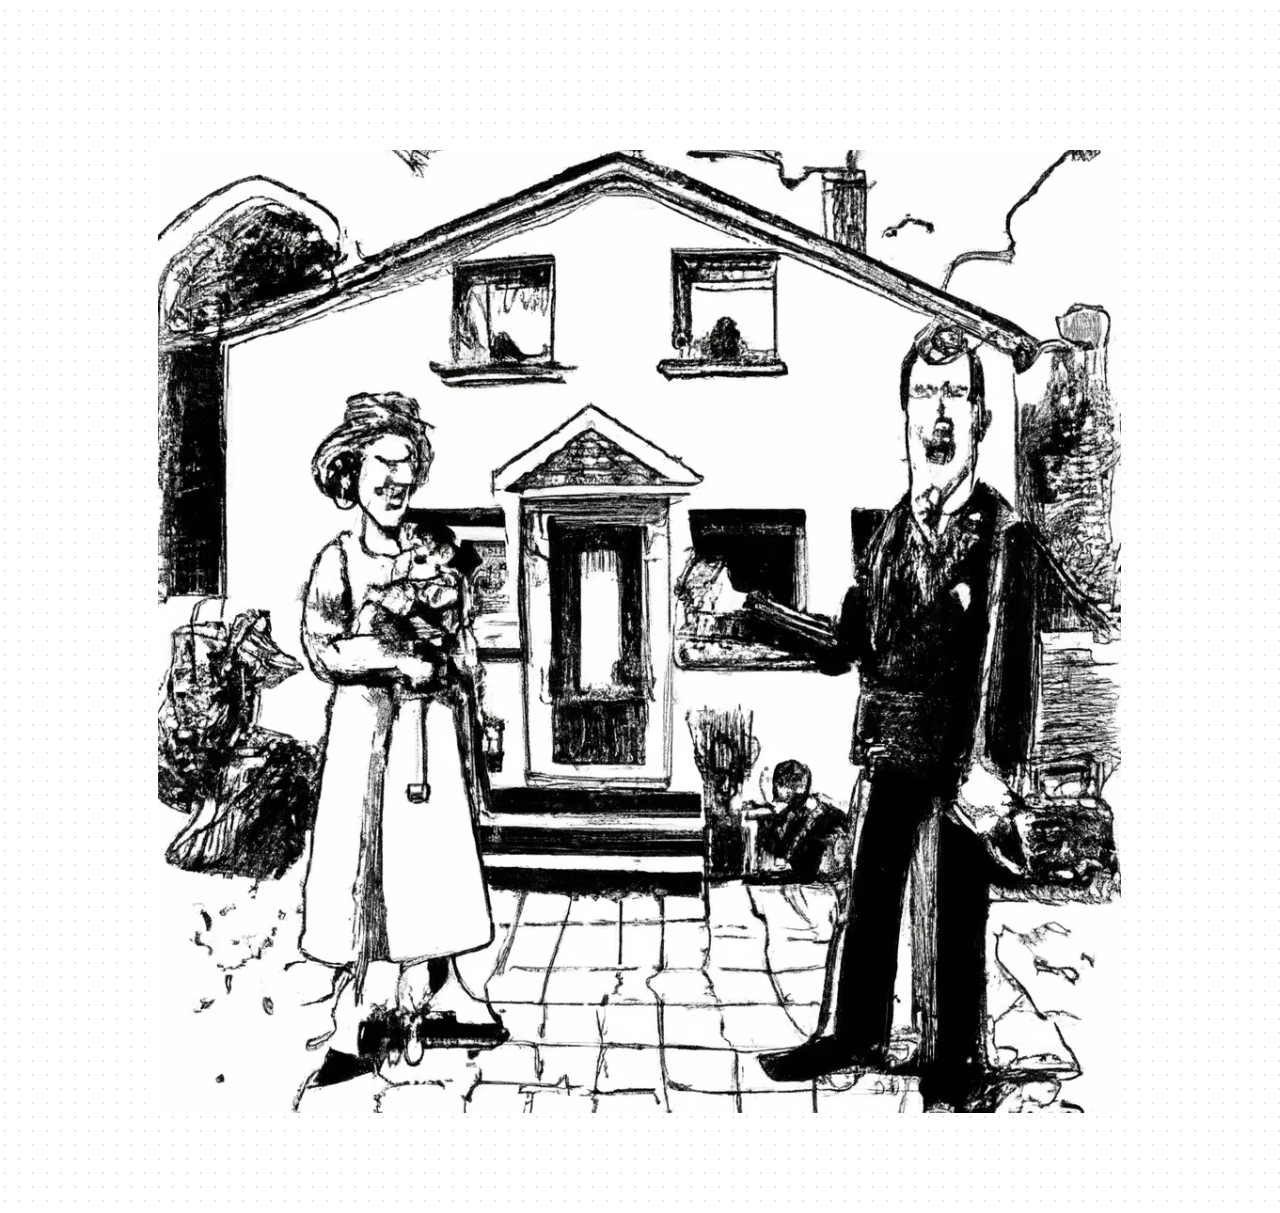 Dall-e2 Query: hatching style, newly wed couple in front of home, black and white